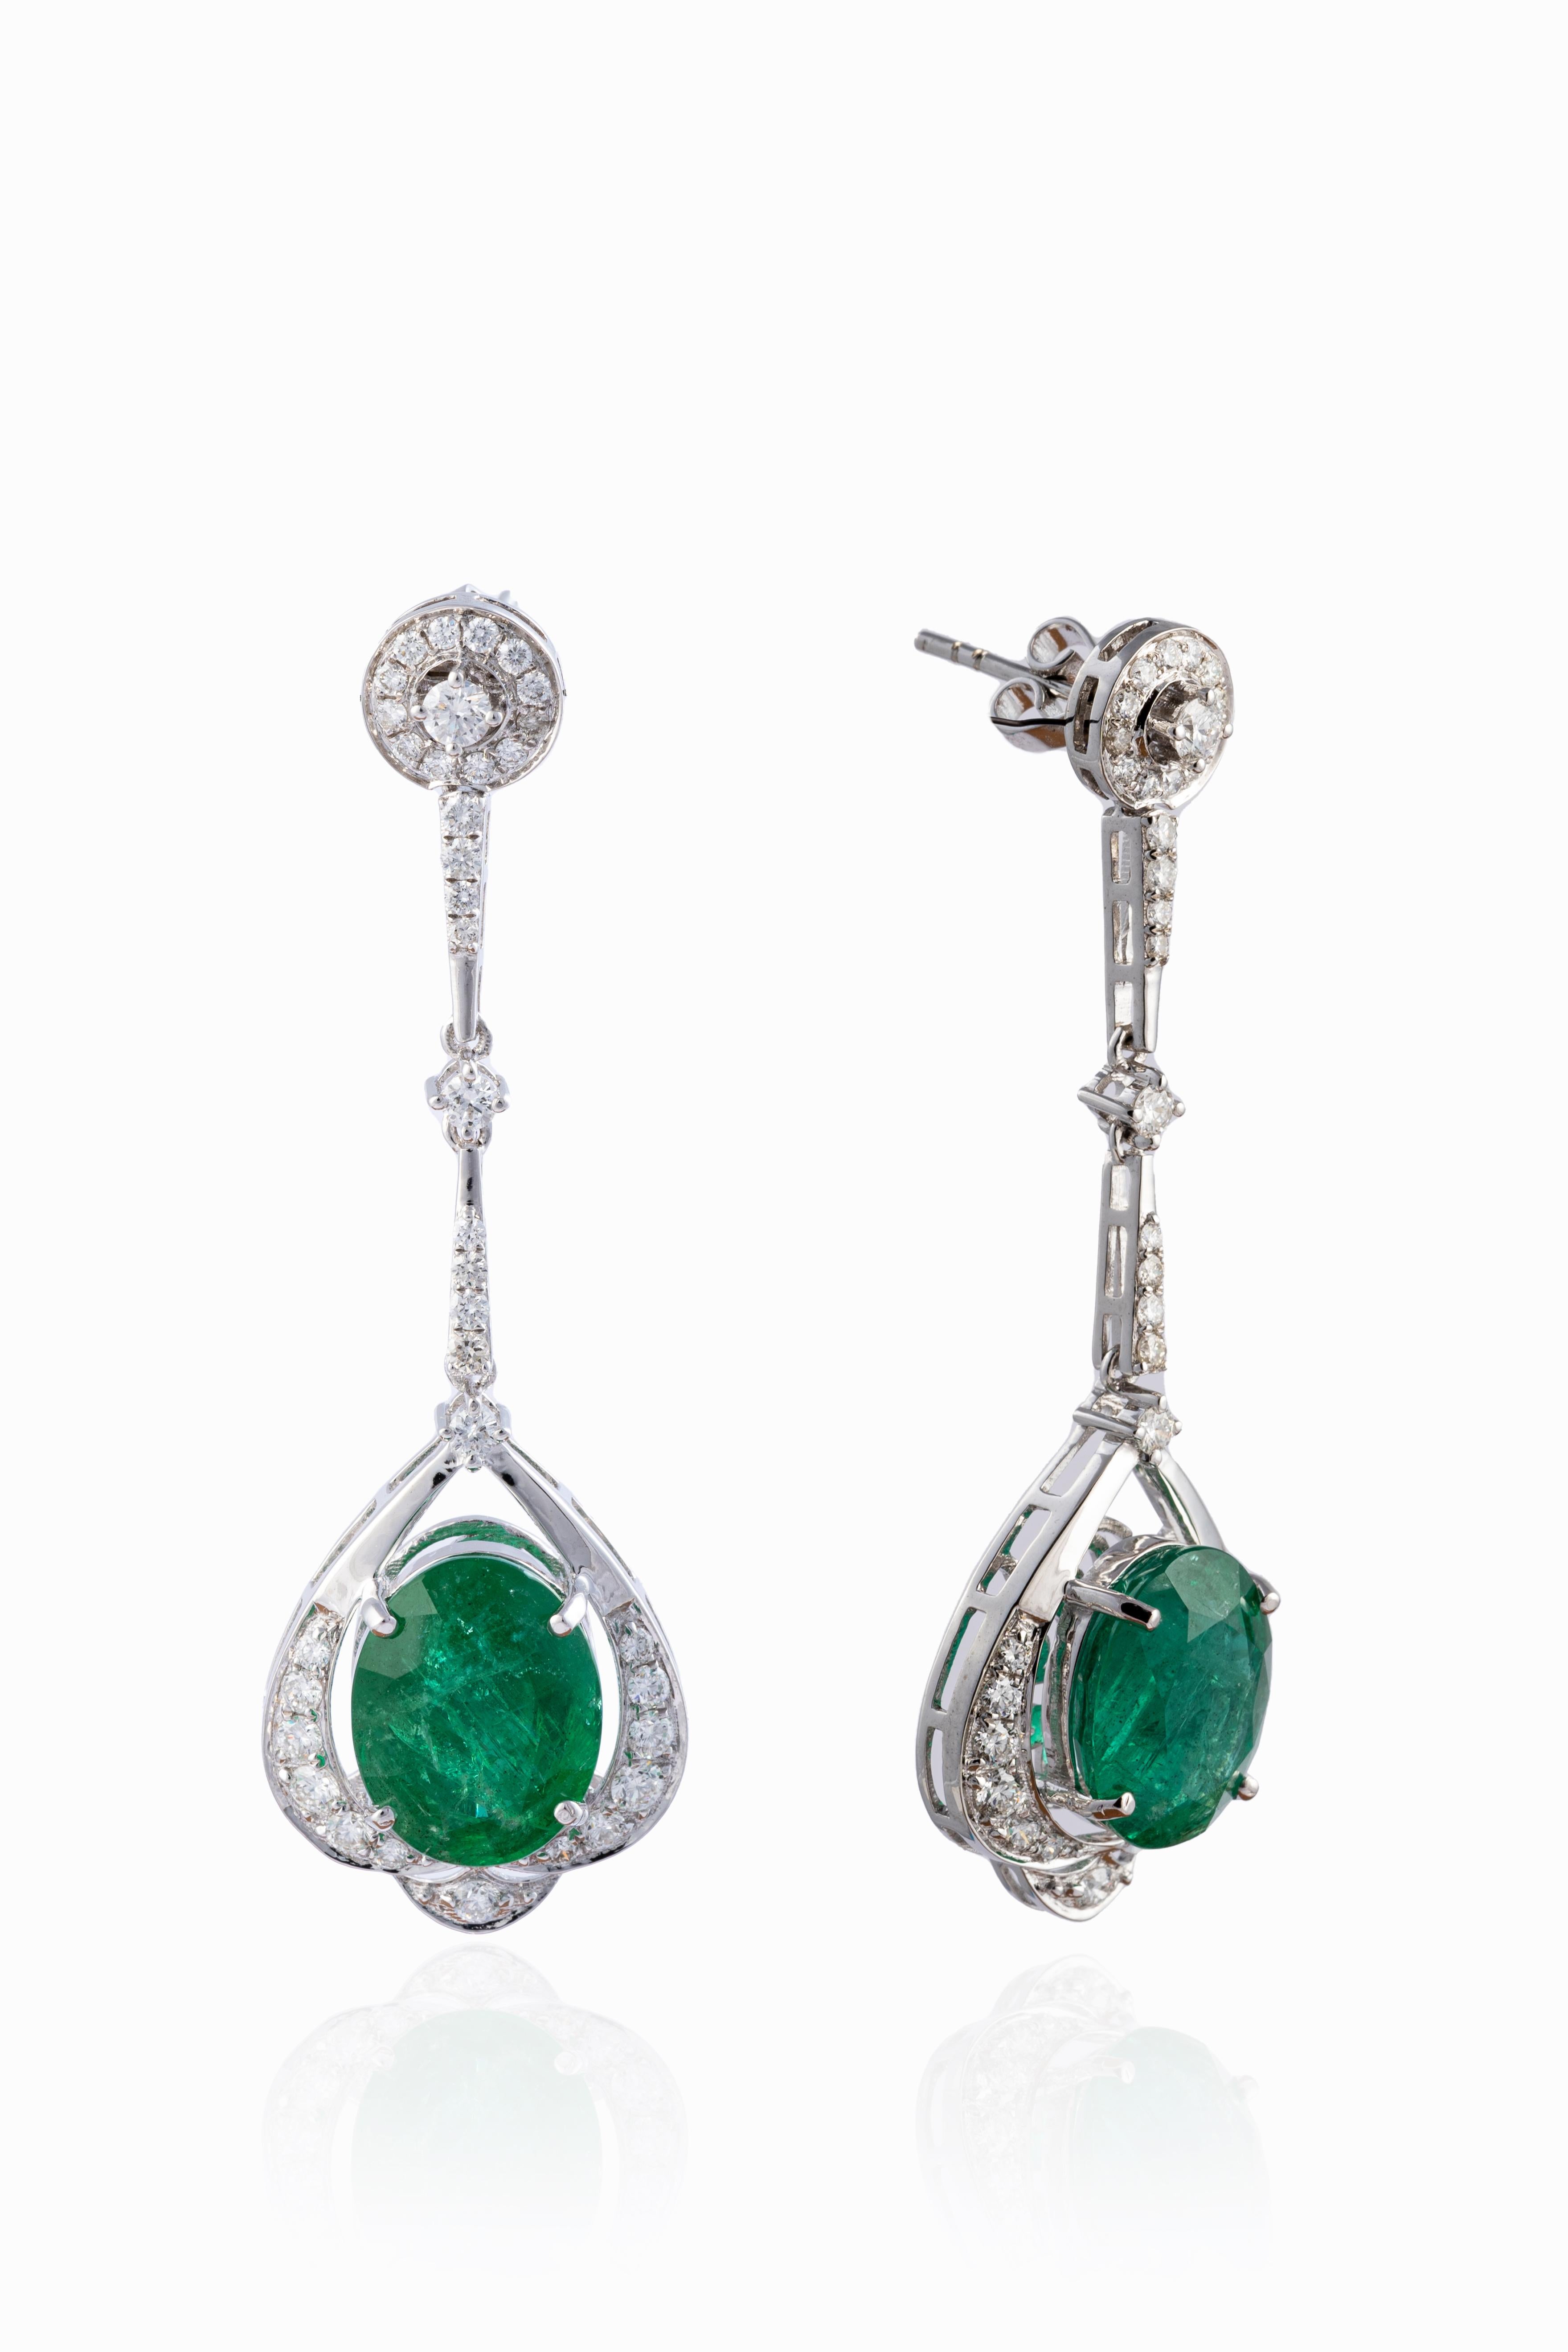 this is stunning natural Zambian Emerald earrings . emerald is of very high quality and diamonds are of very good clarity ( vsi ) and ( g) colour

emeralds: 10.18 cts
diamond : 1.43 cts
gold : 7.93 gms

very hard to capture the true color and luster